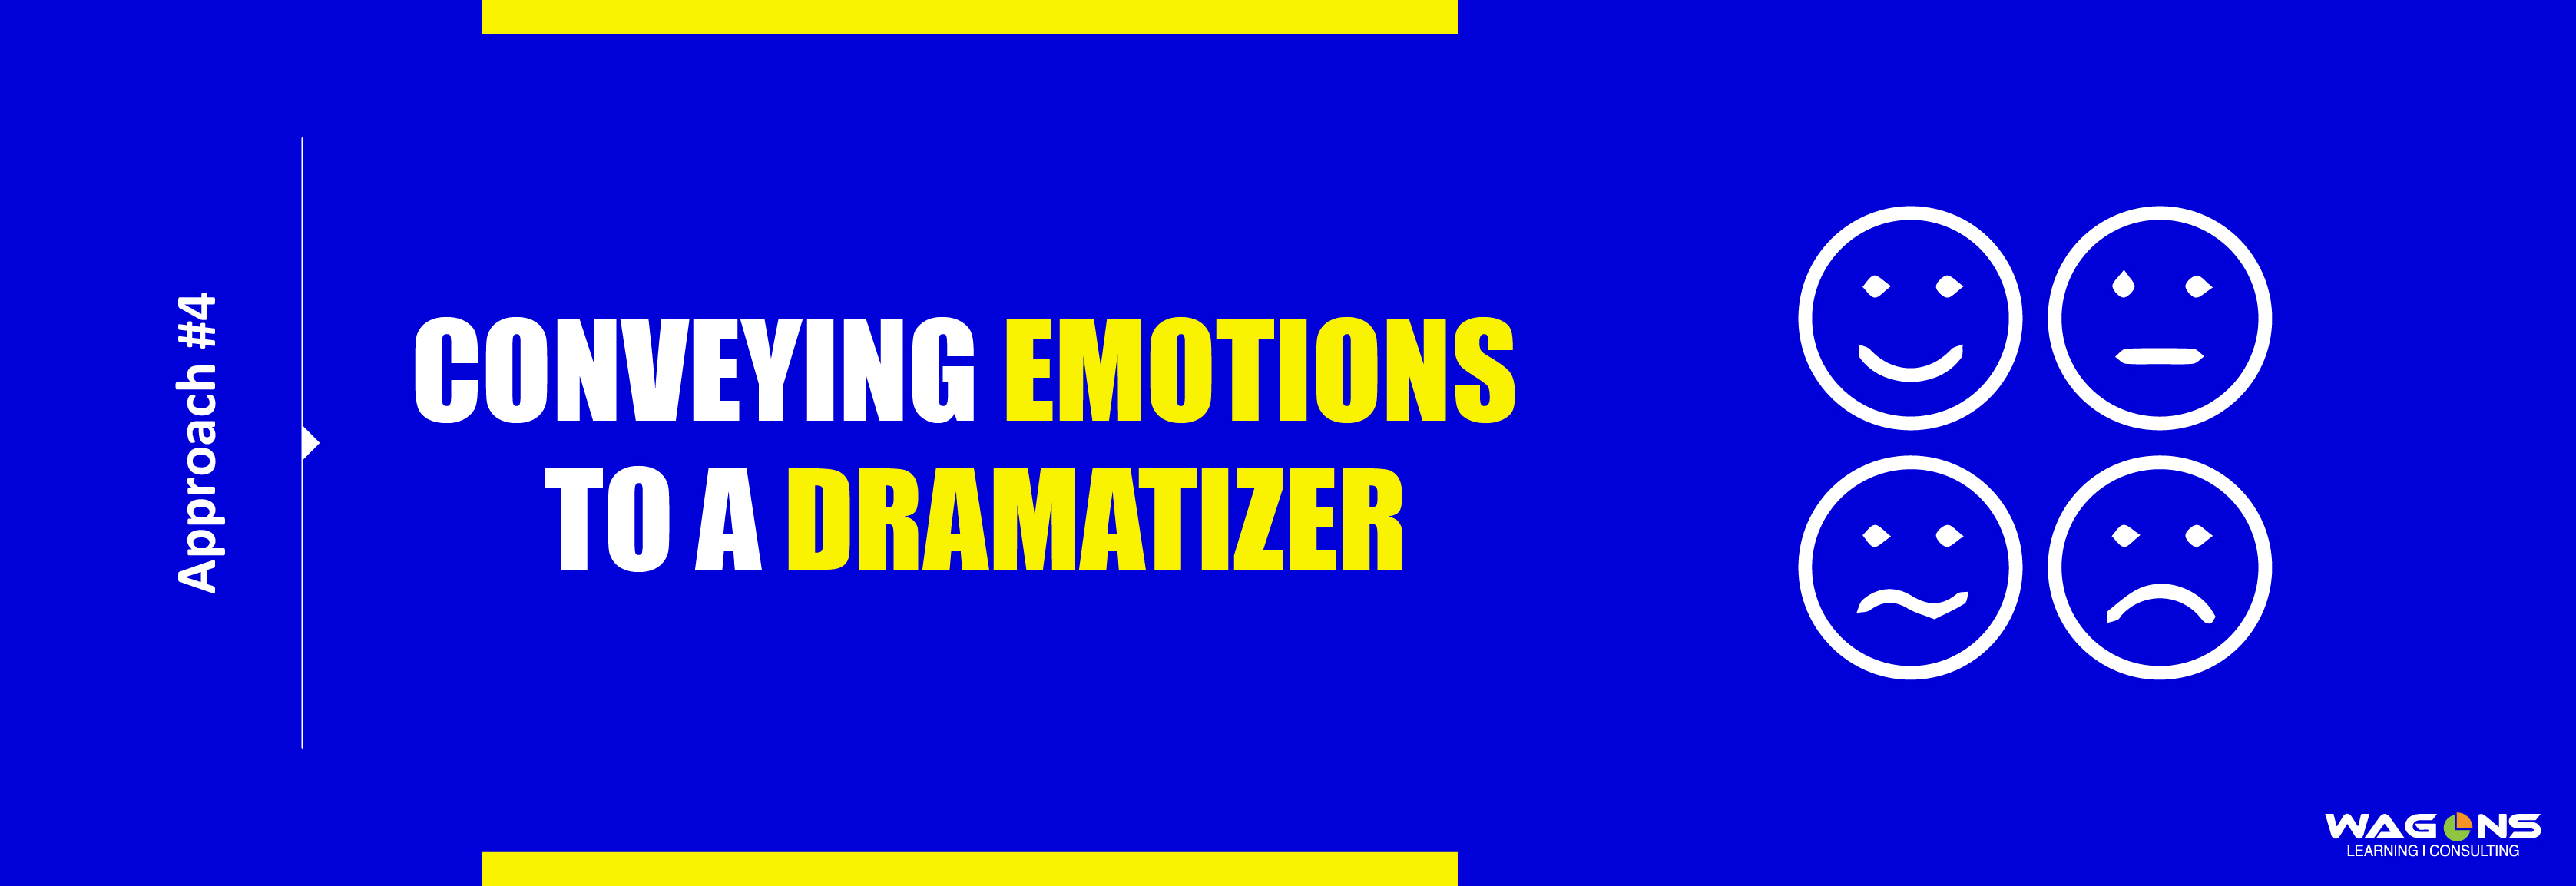 conveying emotions to a dramatizer